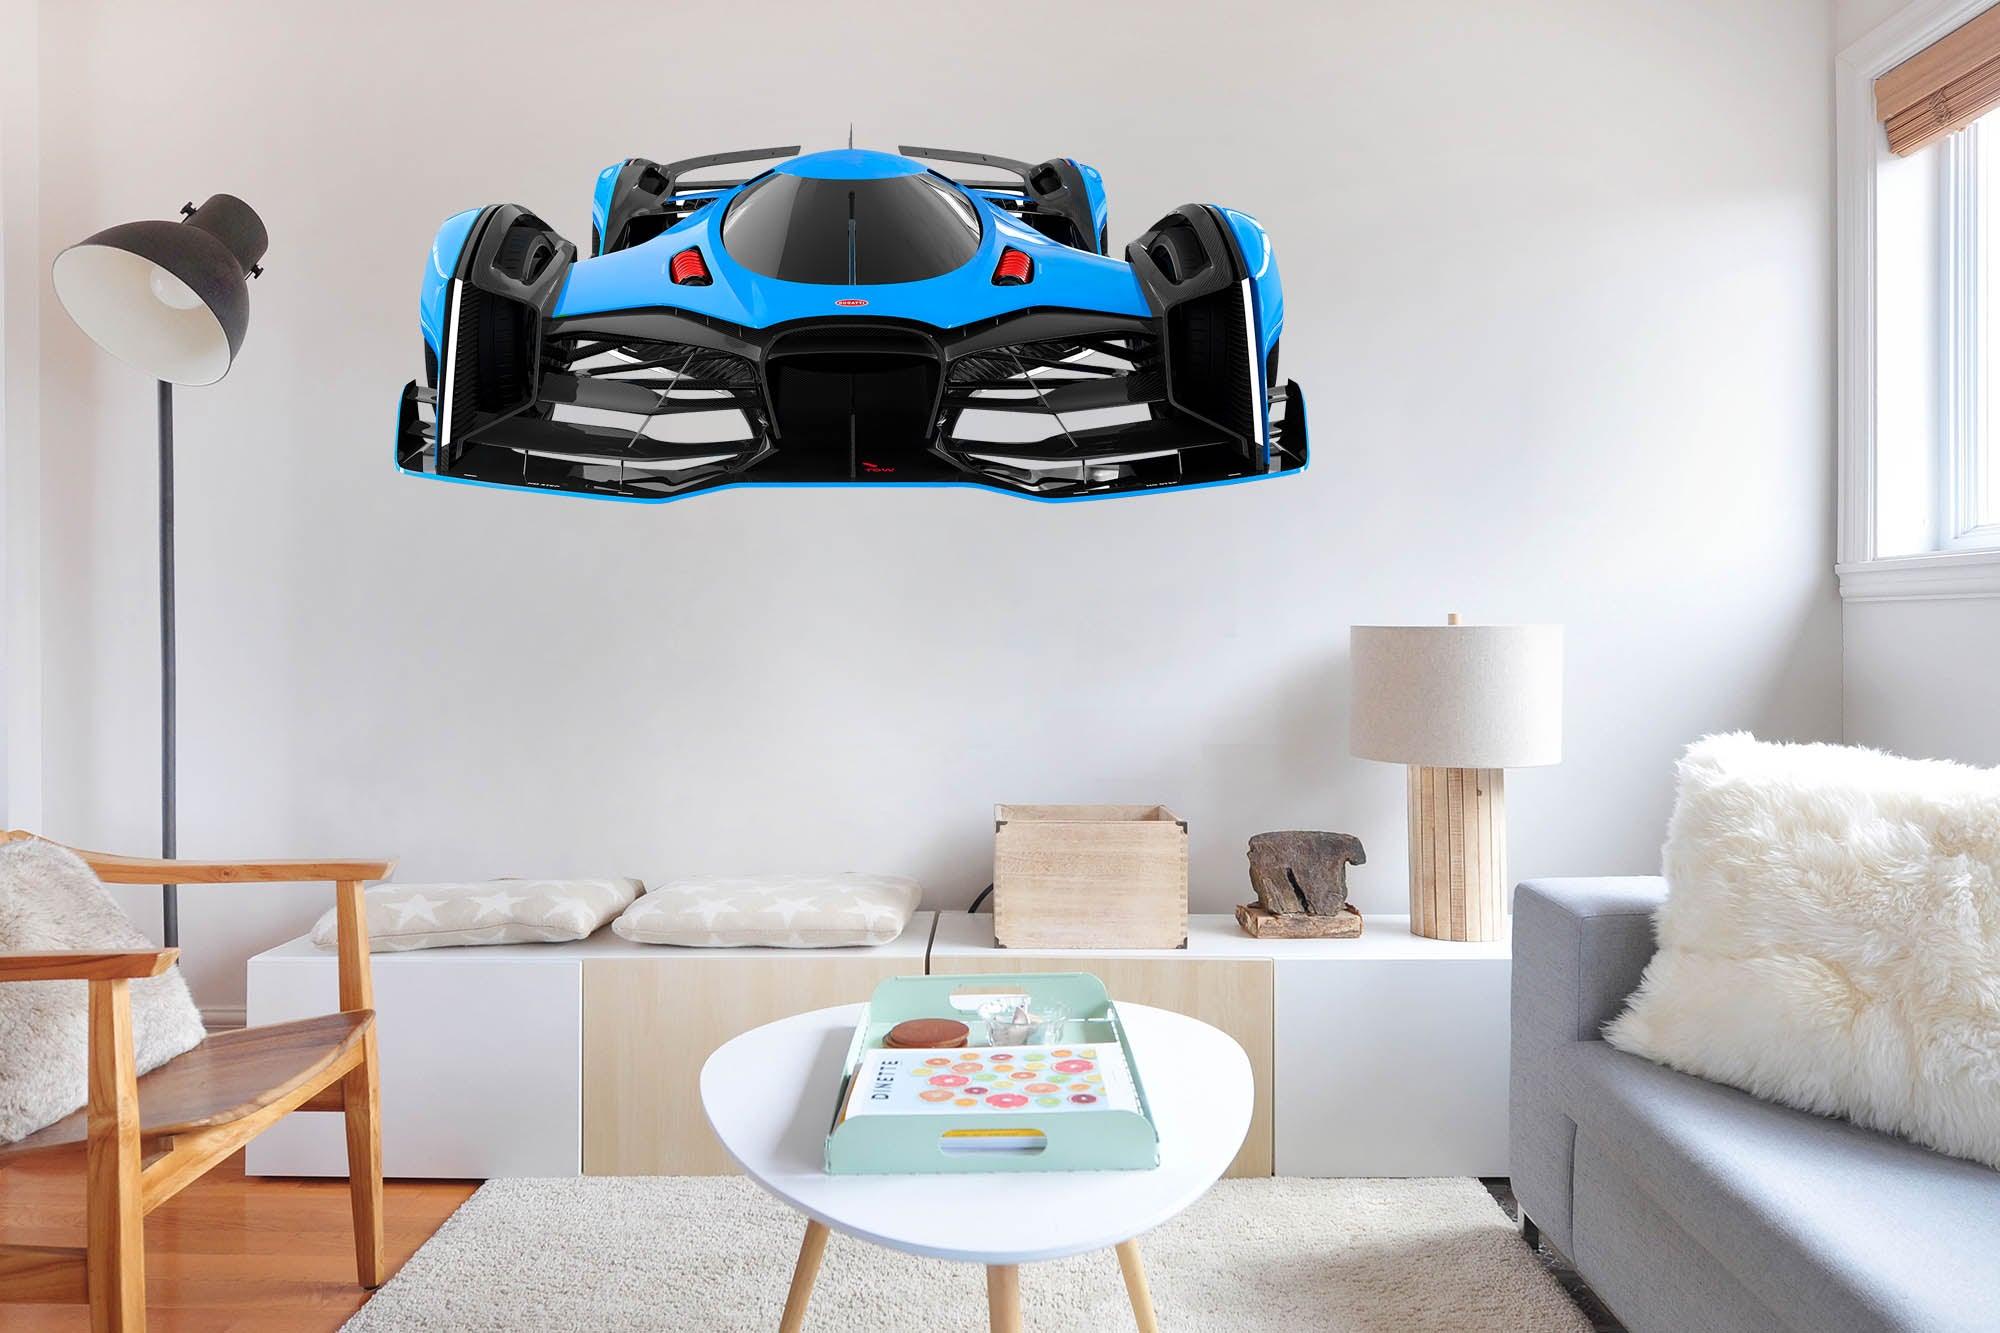 Bugatti Vision Wall Removable Decal Car Sticker 045 - CoolWalls.ca